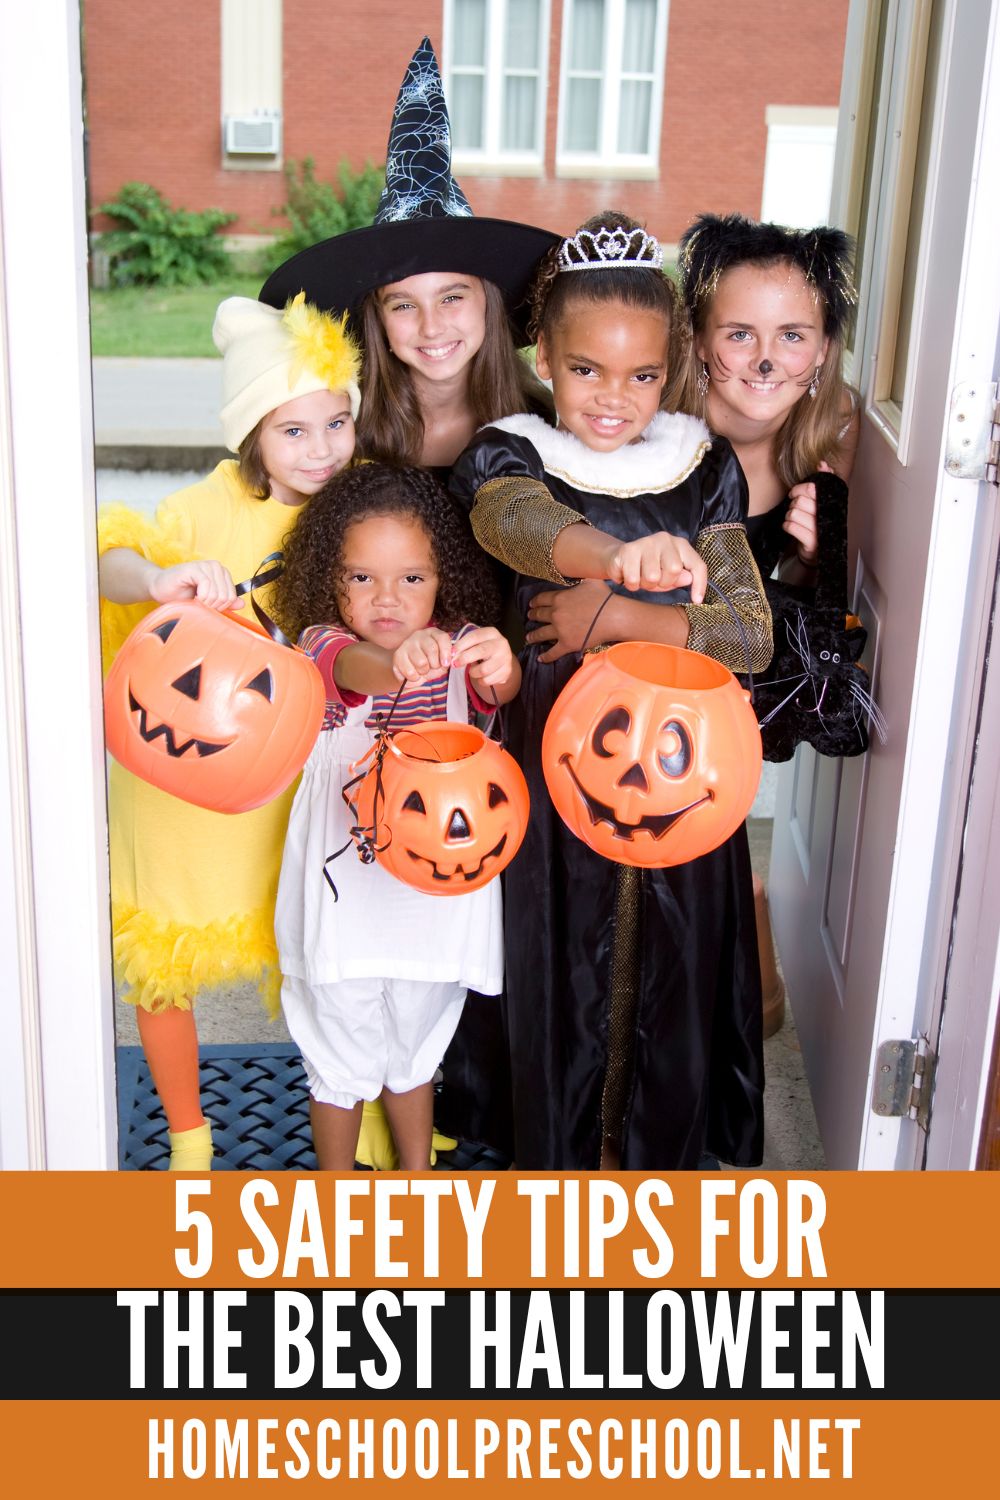 halloween-safety-tips 5 Safety Rules for Halloween